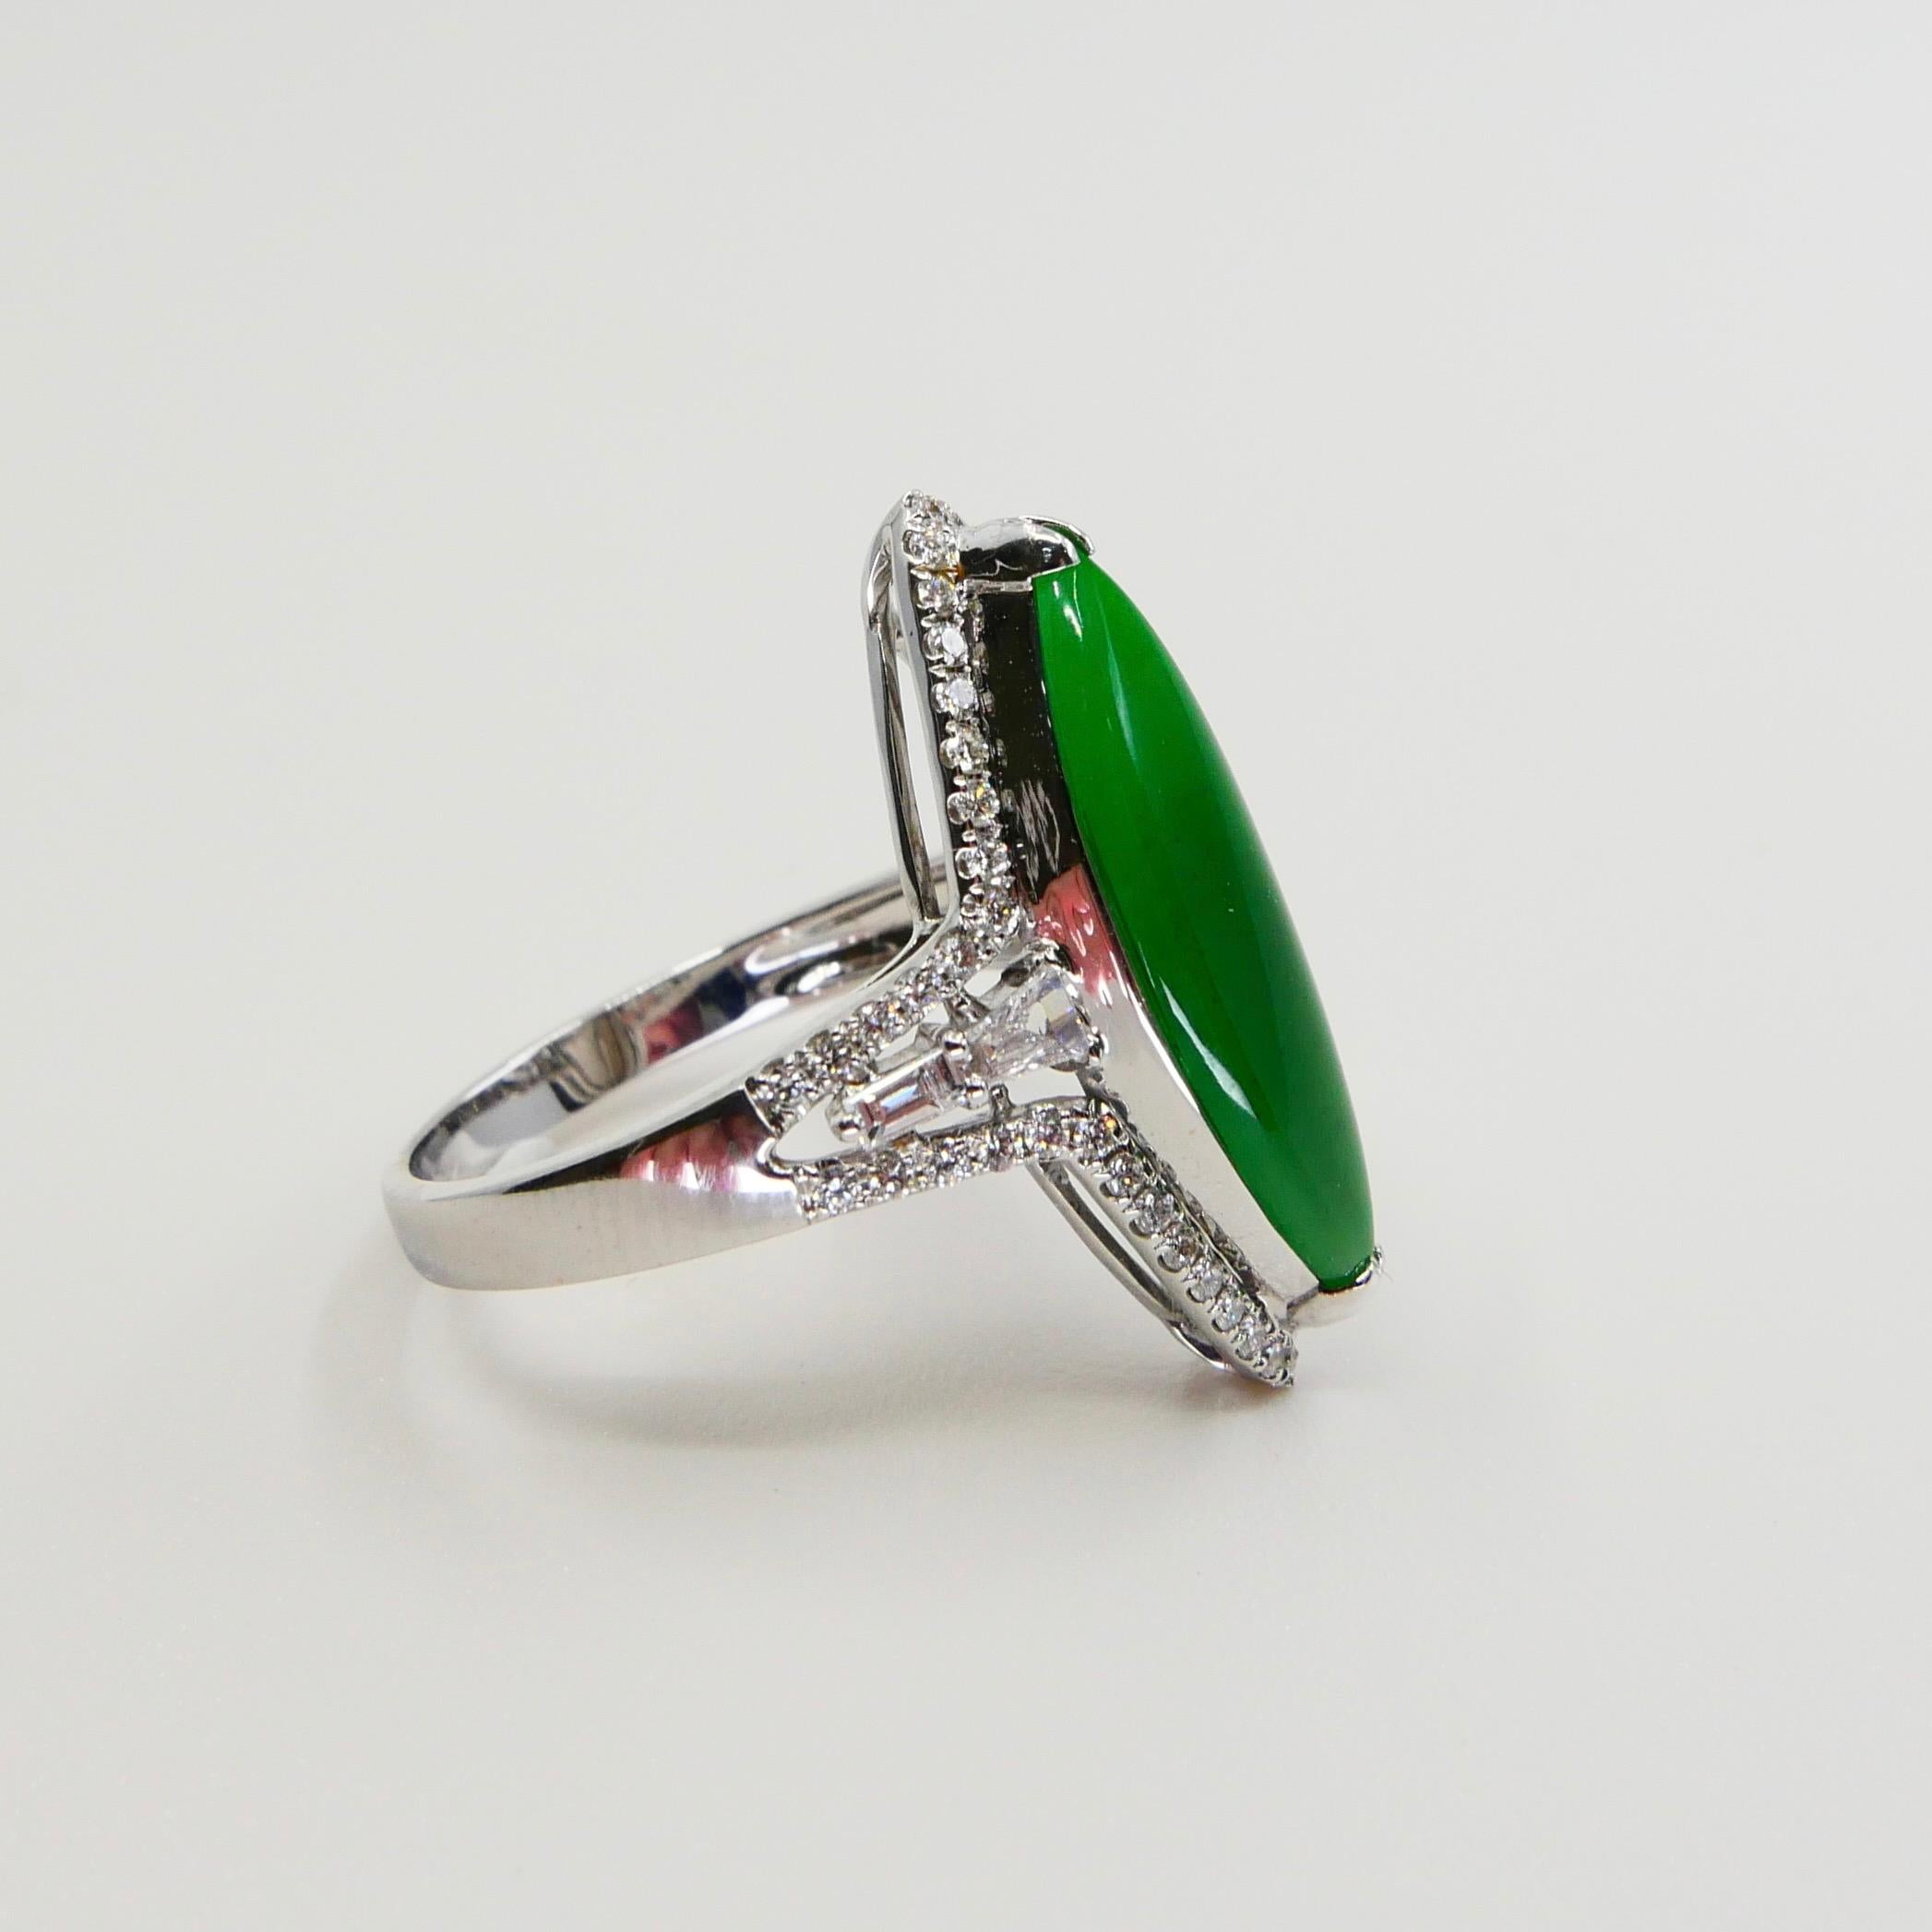 Certified Jadeite Jade and Diamond Cocktail Ring, Intense Apple Green Color For Sale 3